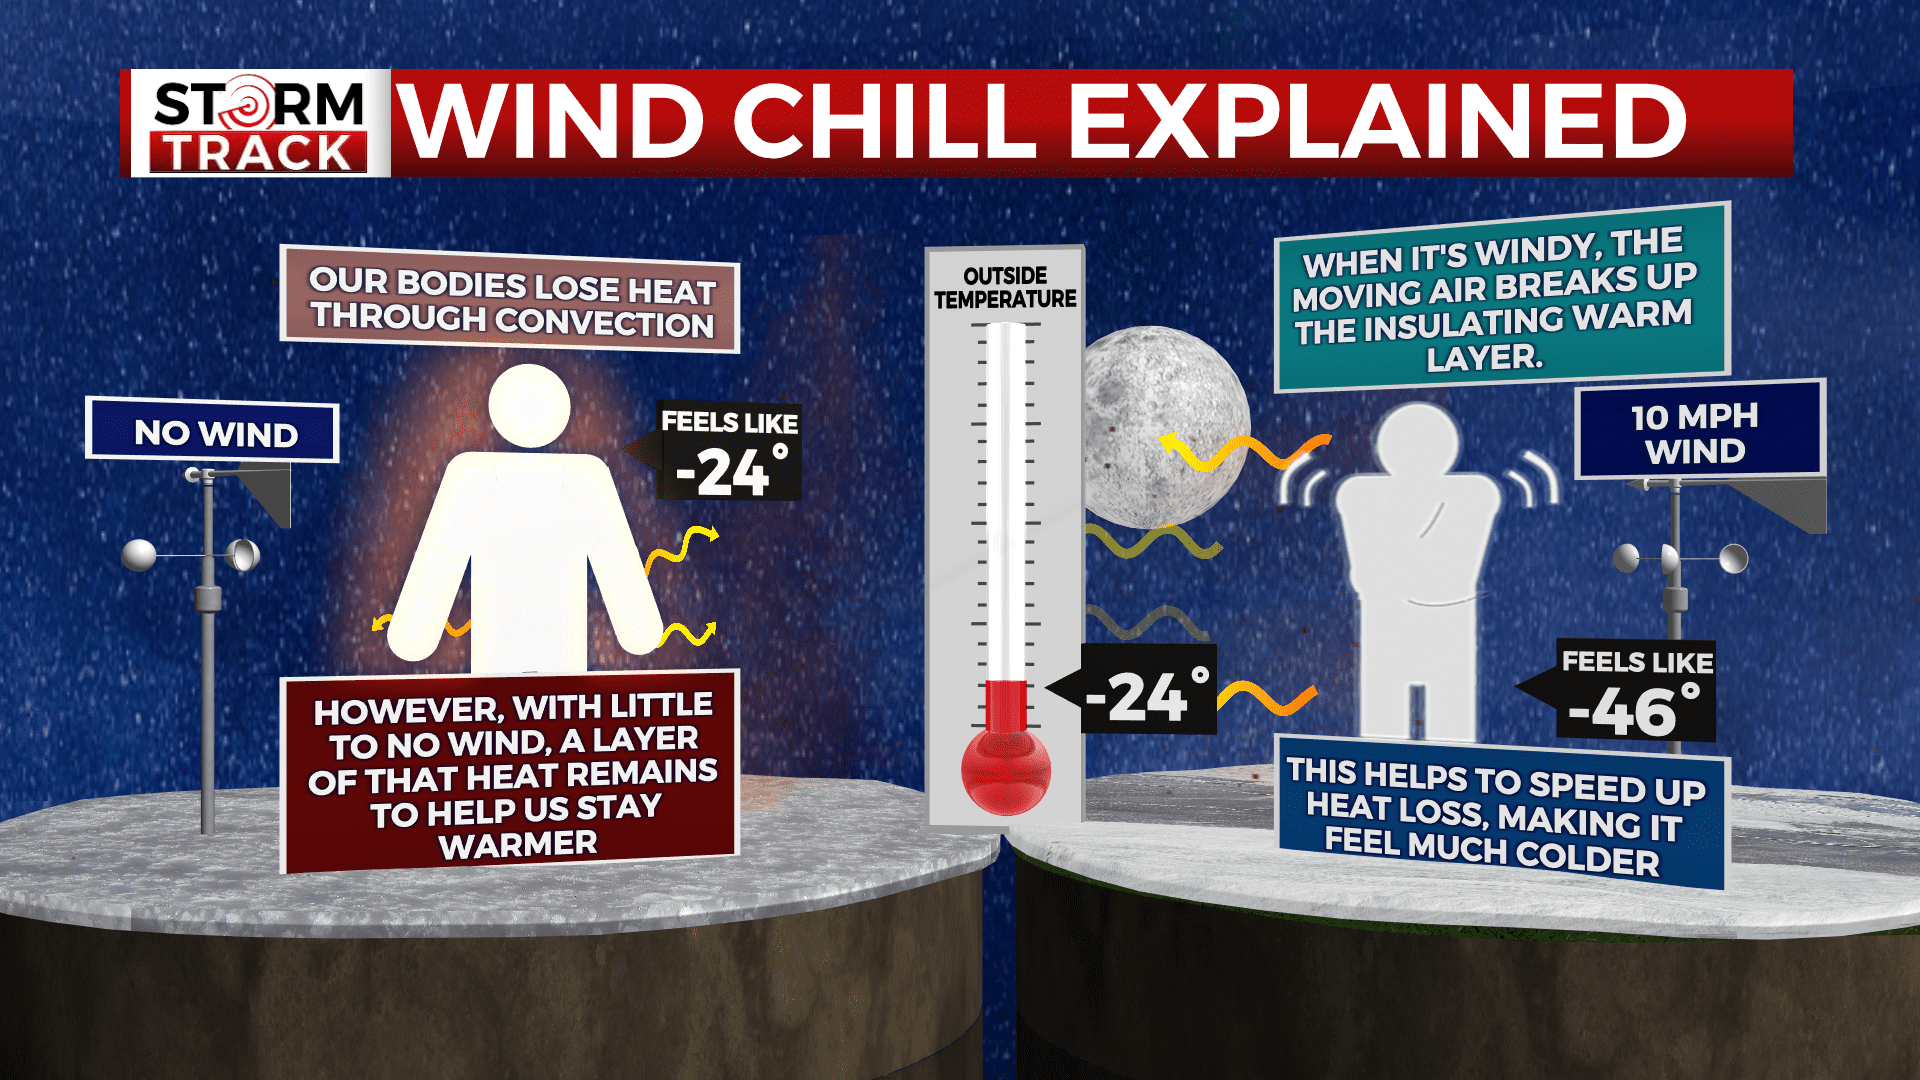 A graphic breaking down wind chill